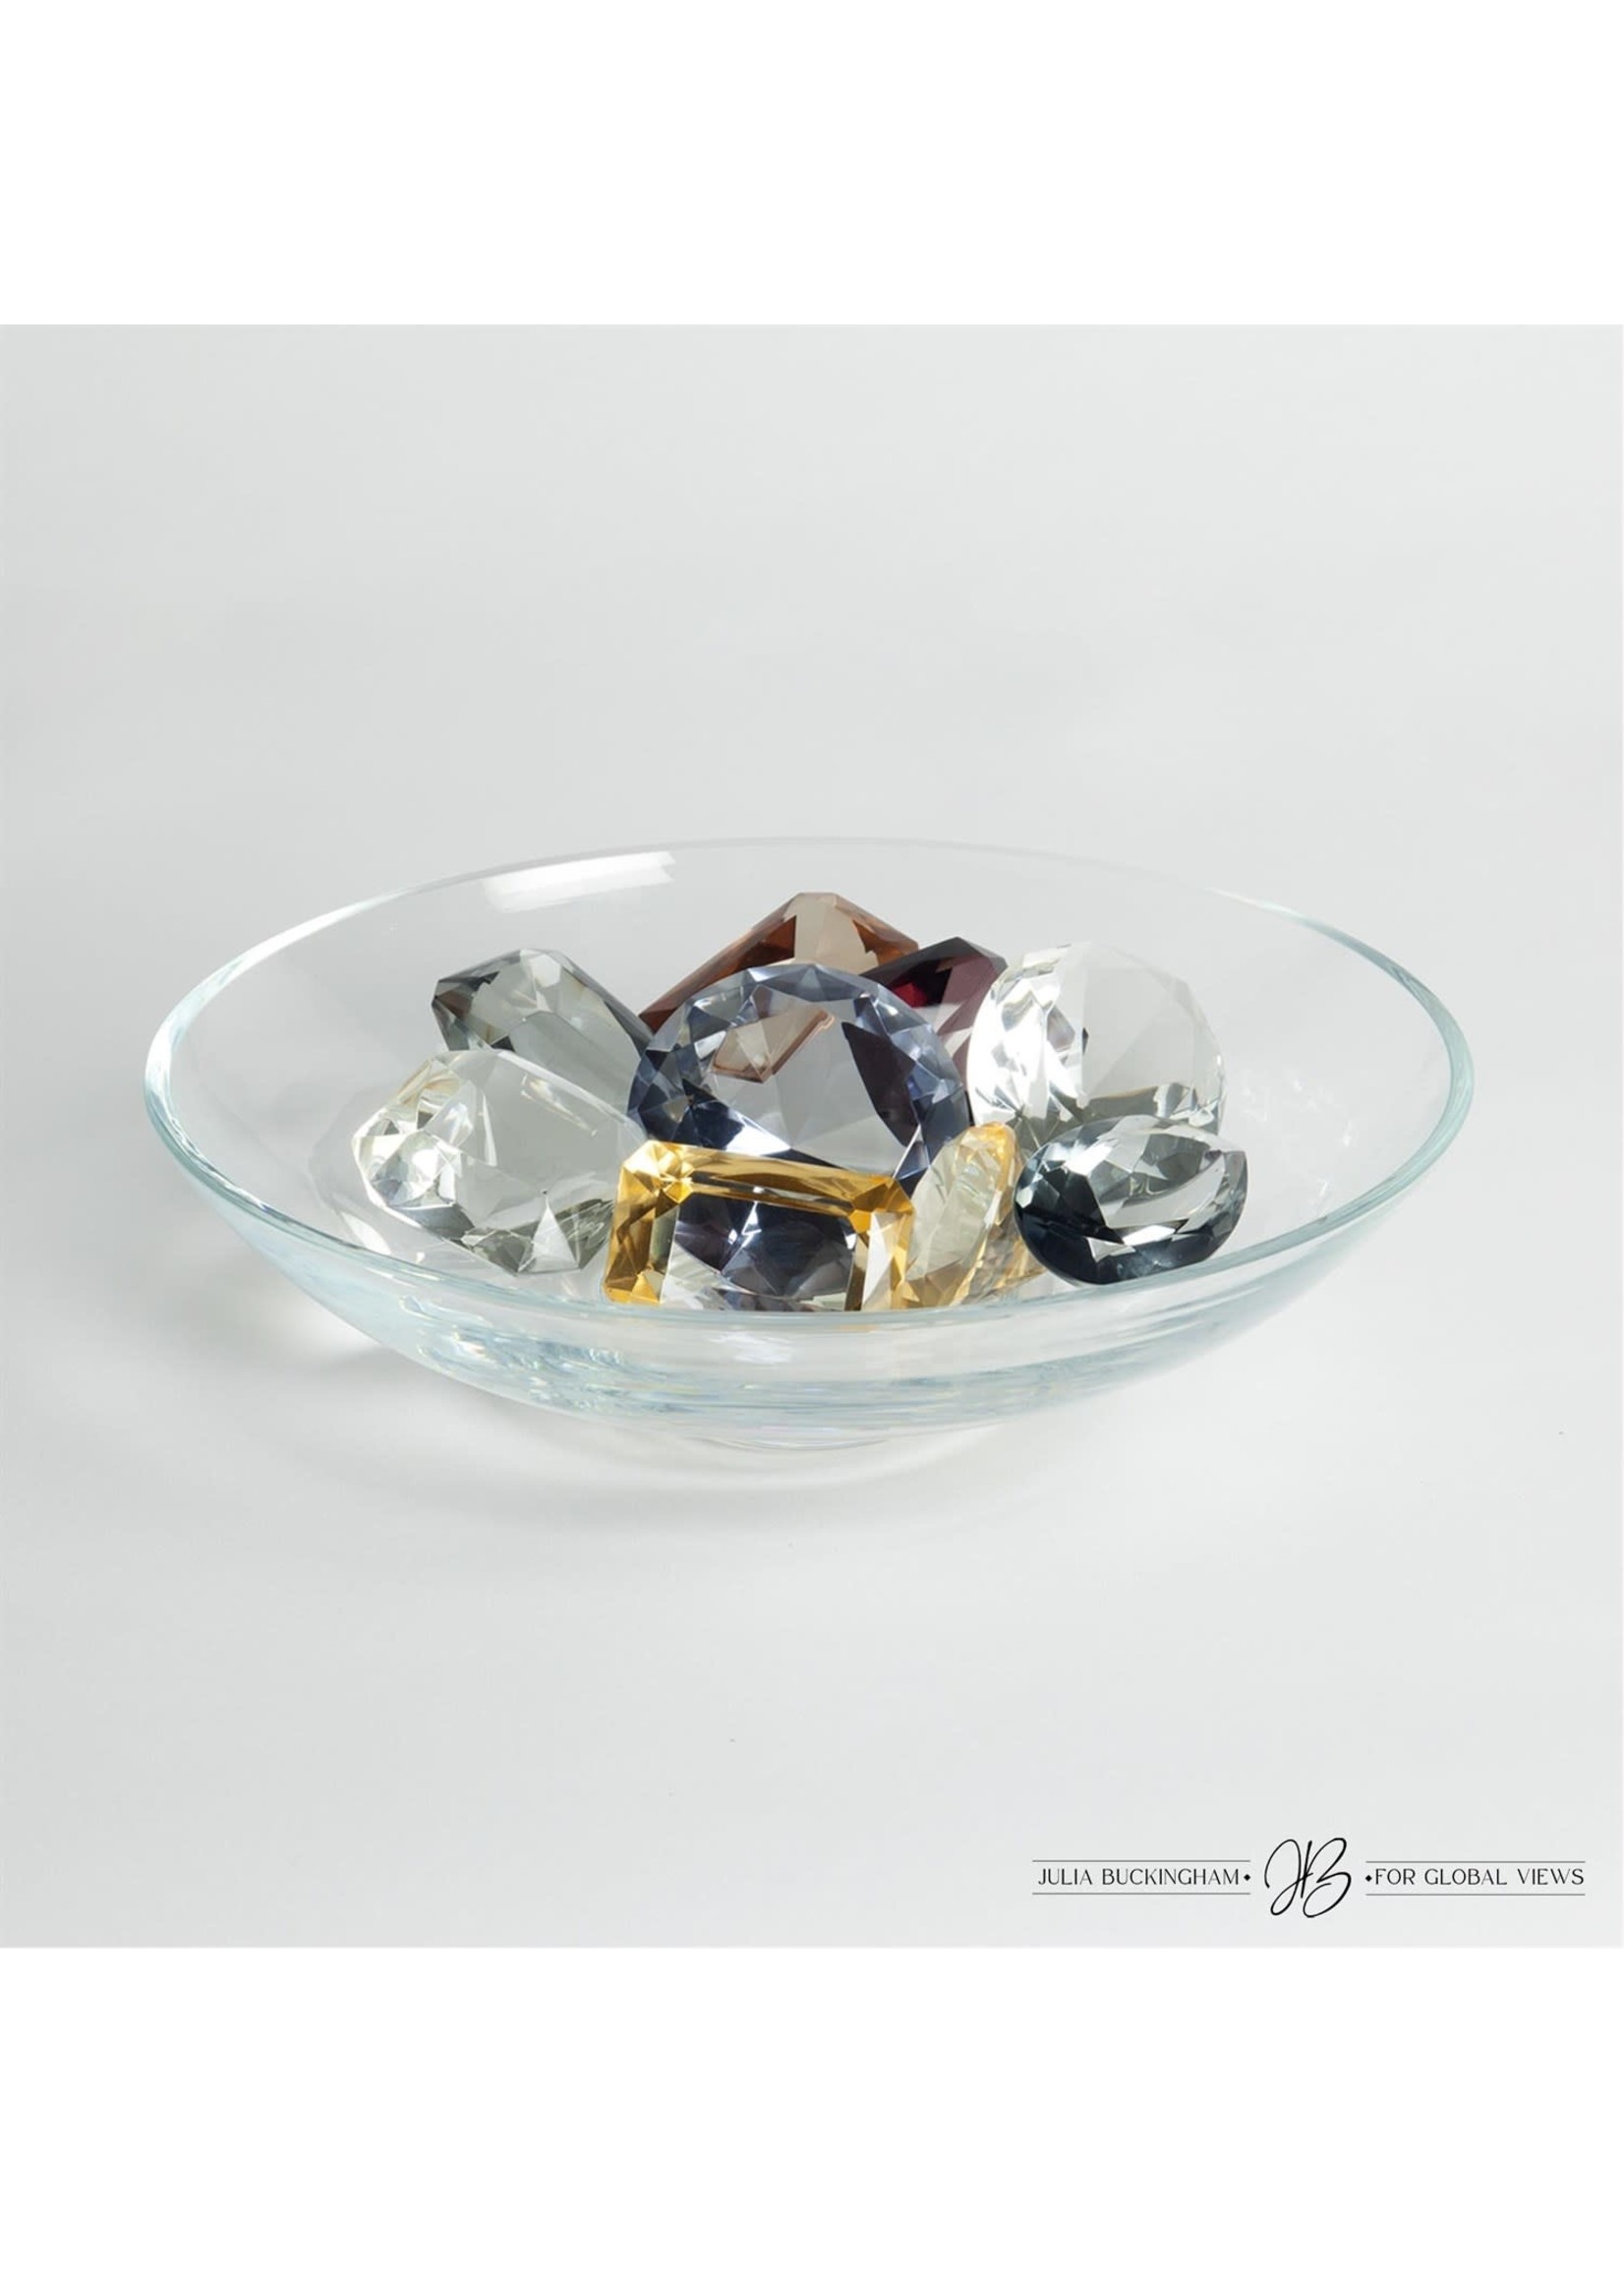 Global Views Global Views Coupe Clear Glass Bowl w/9 Oxford Jewels